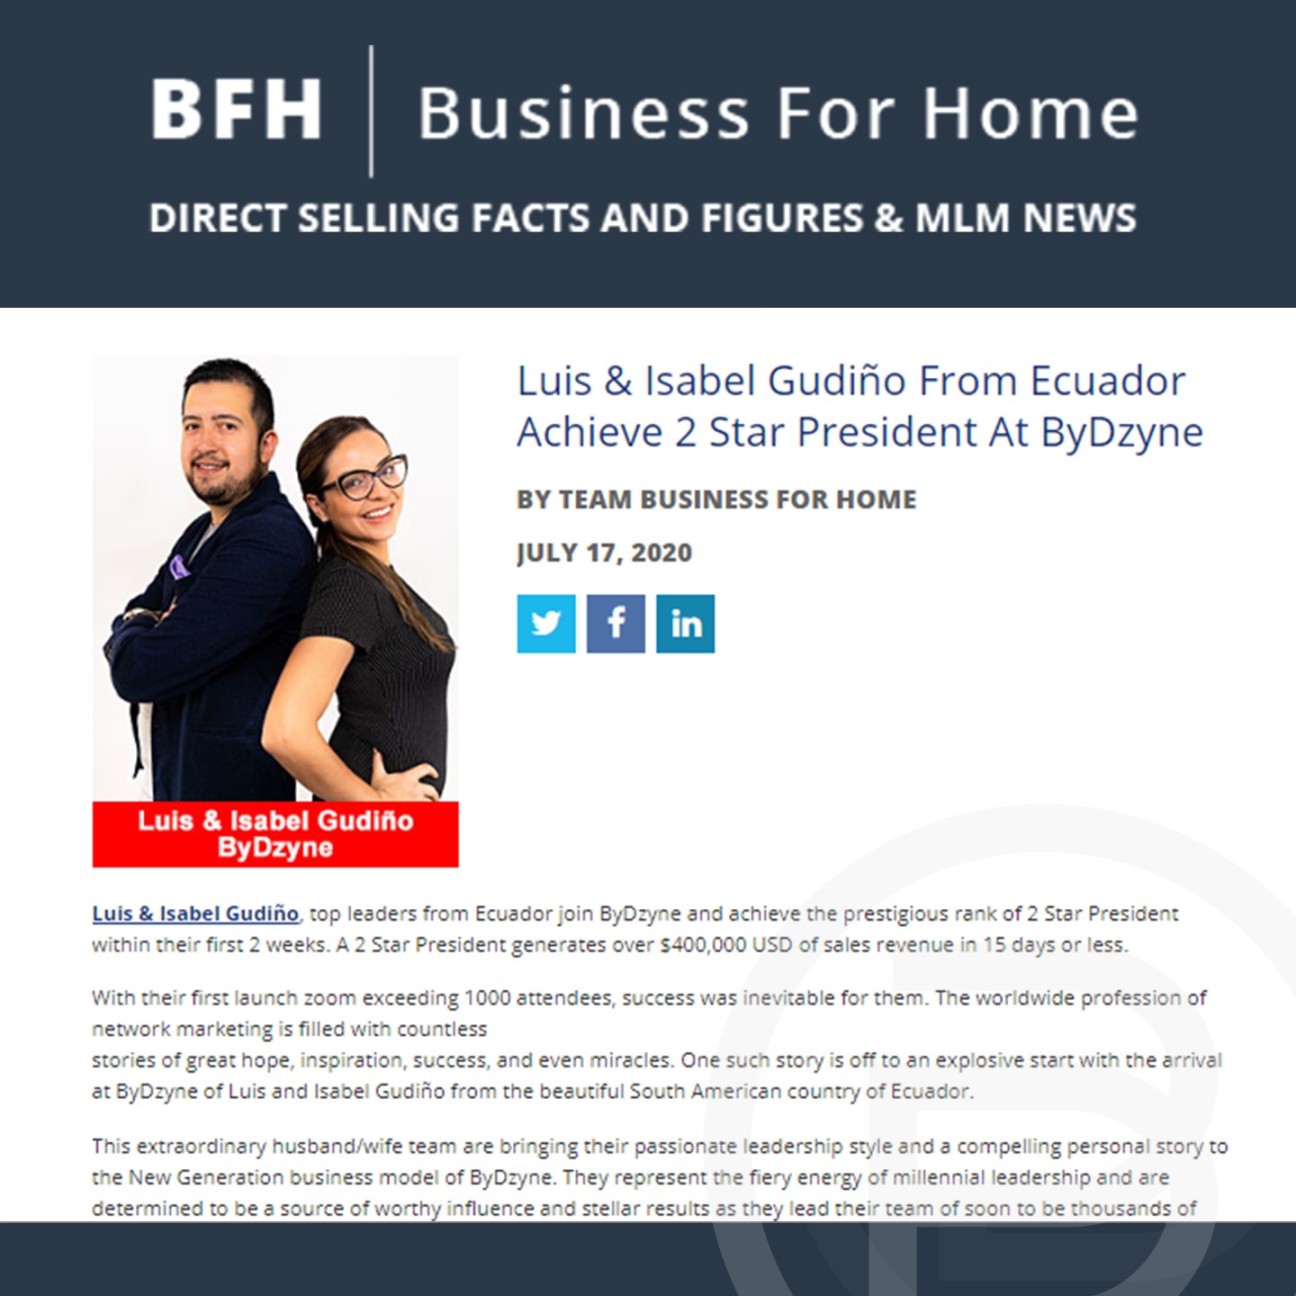 BFH: Luis & Isabel Gudiño From Ecuador Achieve 2 Star President At ByDzyne